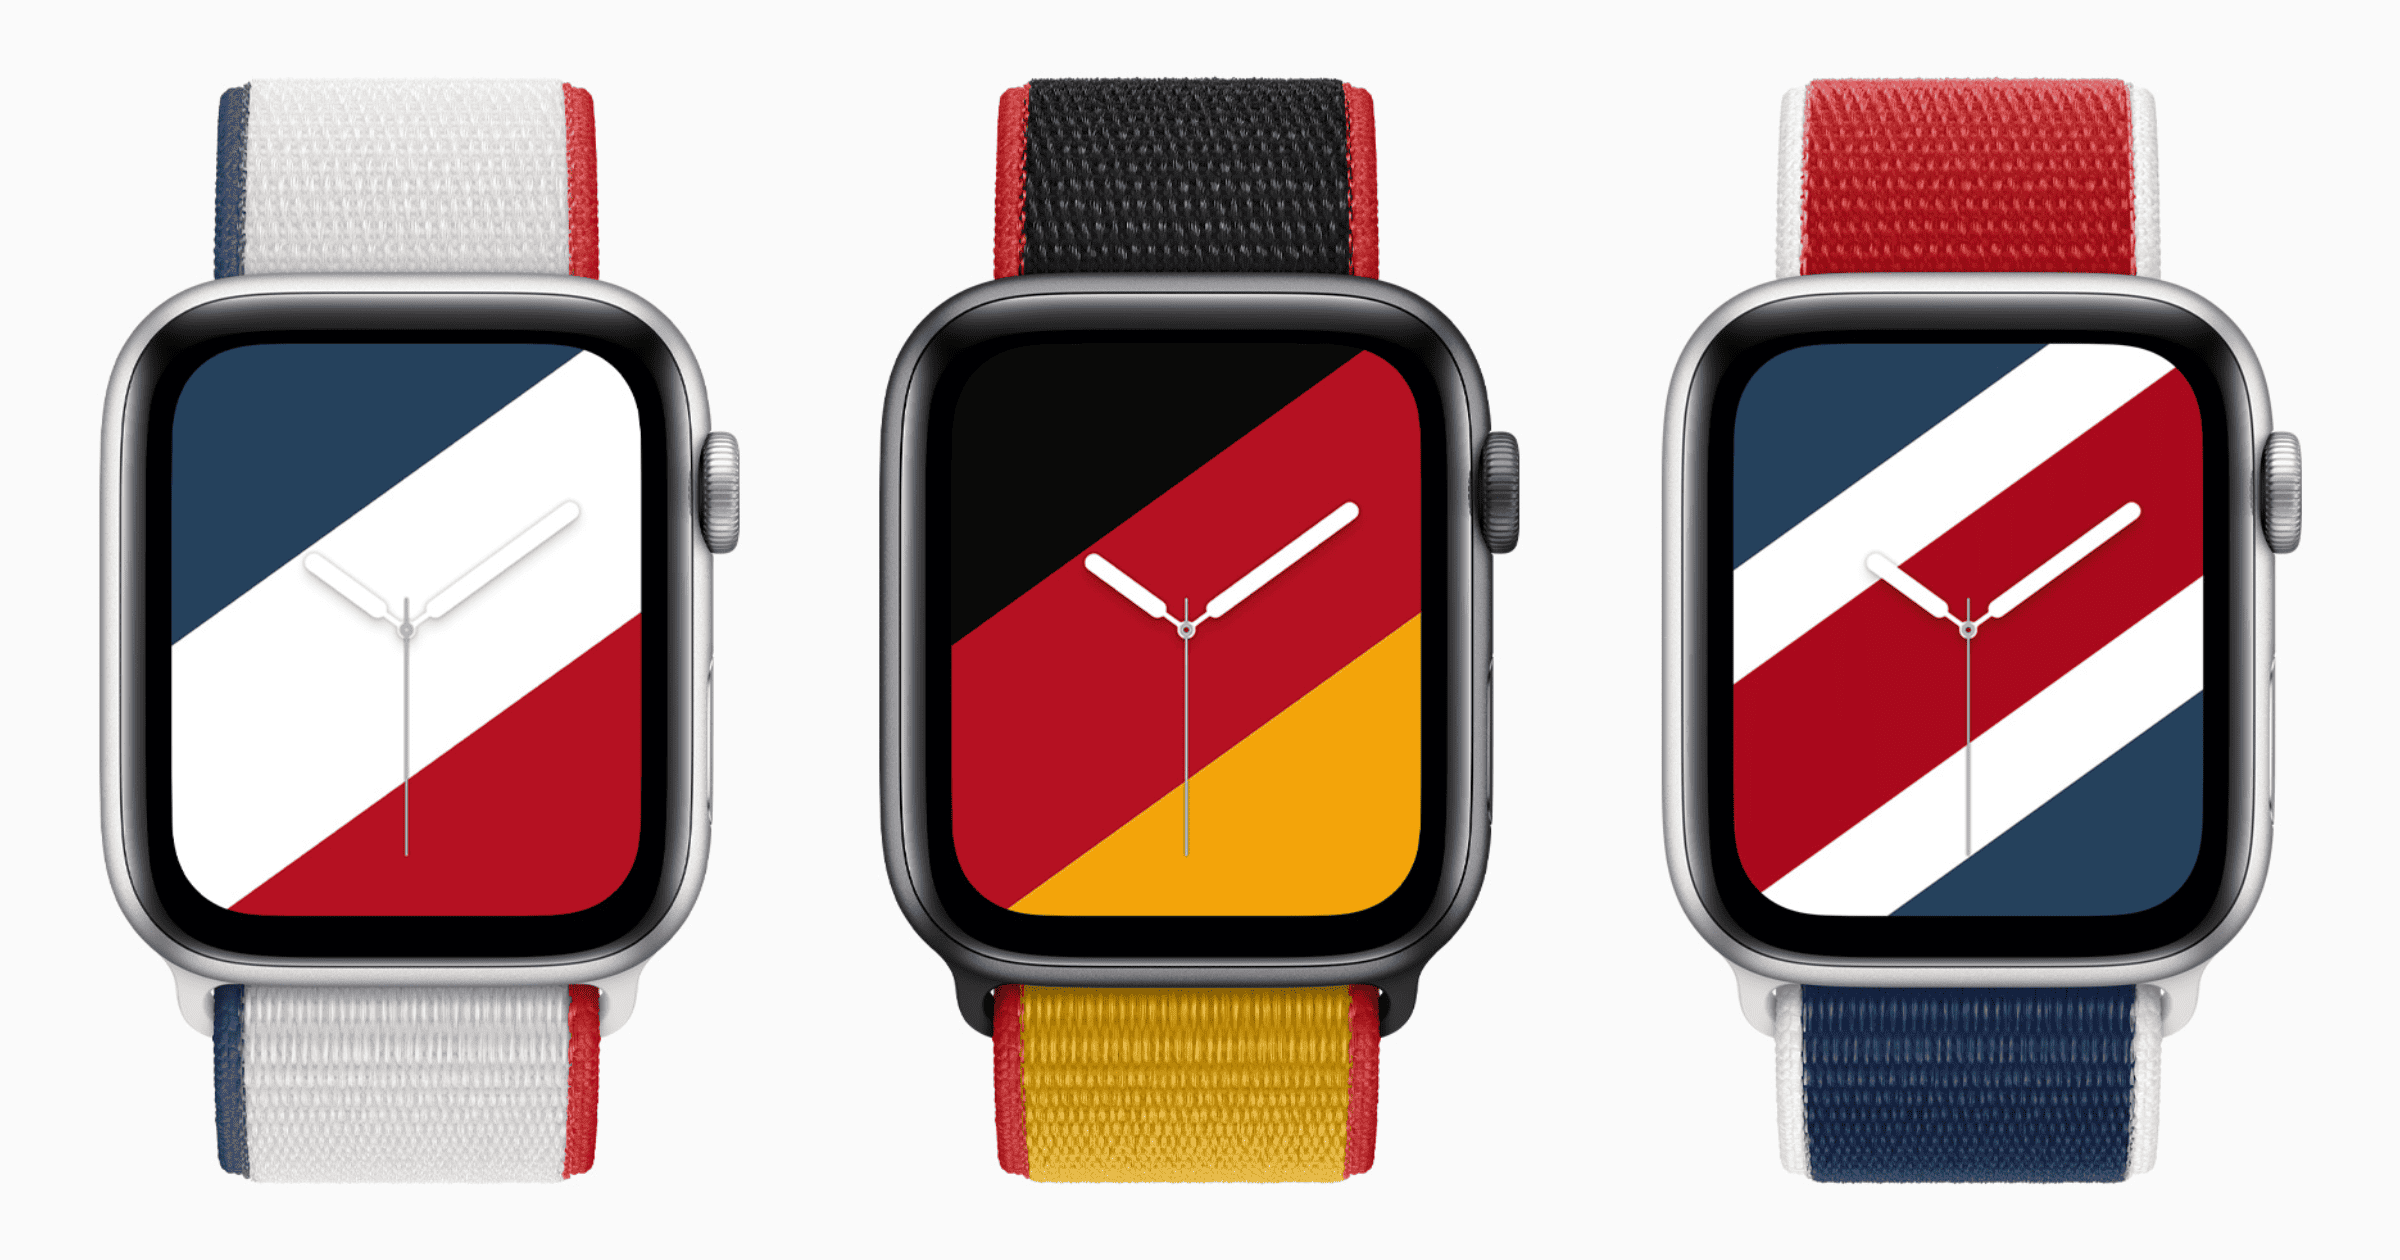 Apple Releases Apple Watch International Collection Bands and Faces